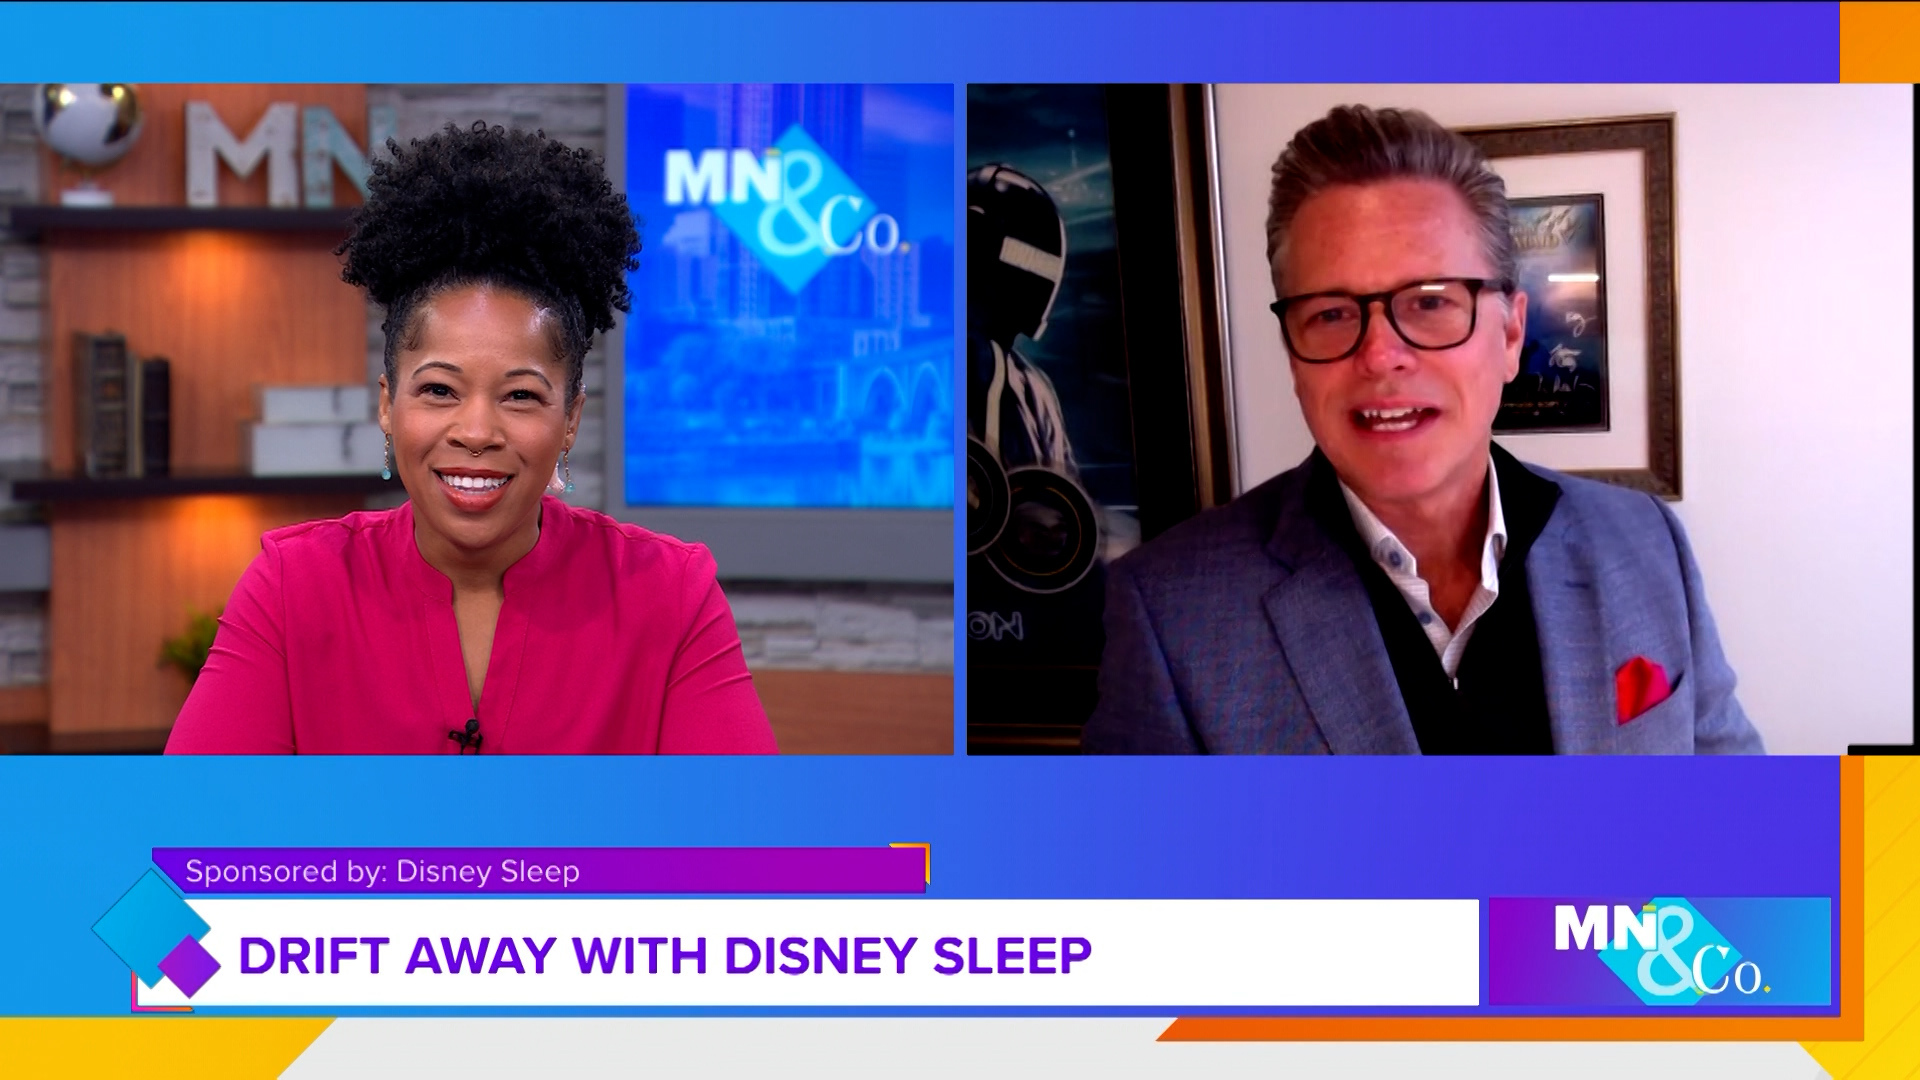 Disney Sleep joins Minnesota and Company to discuss how you can have your best sleep as well as their special ongoing contest.